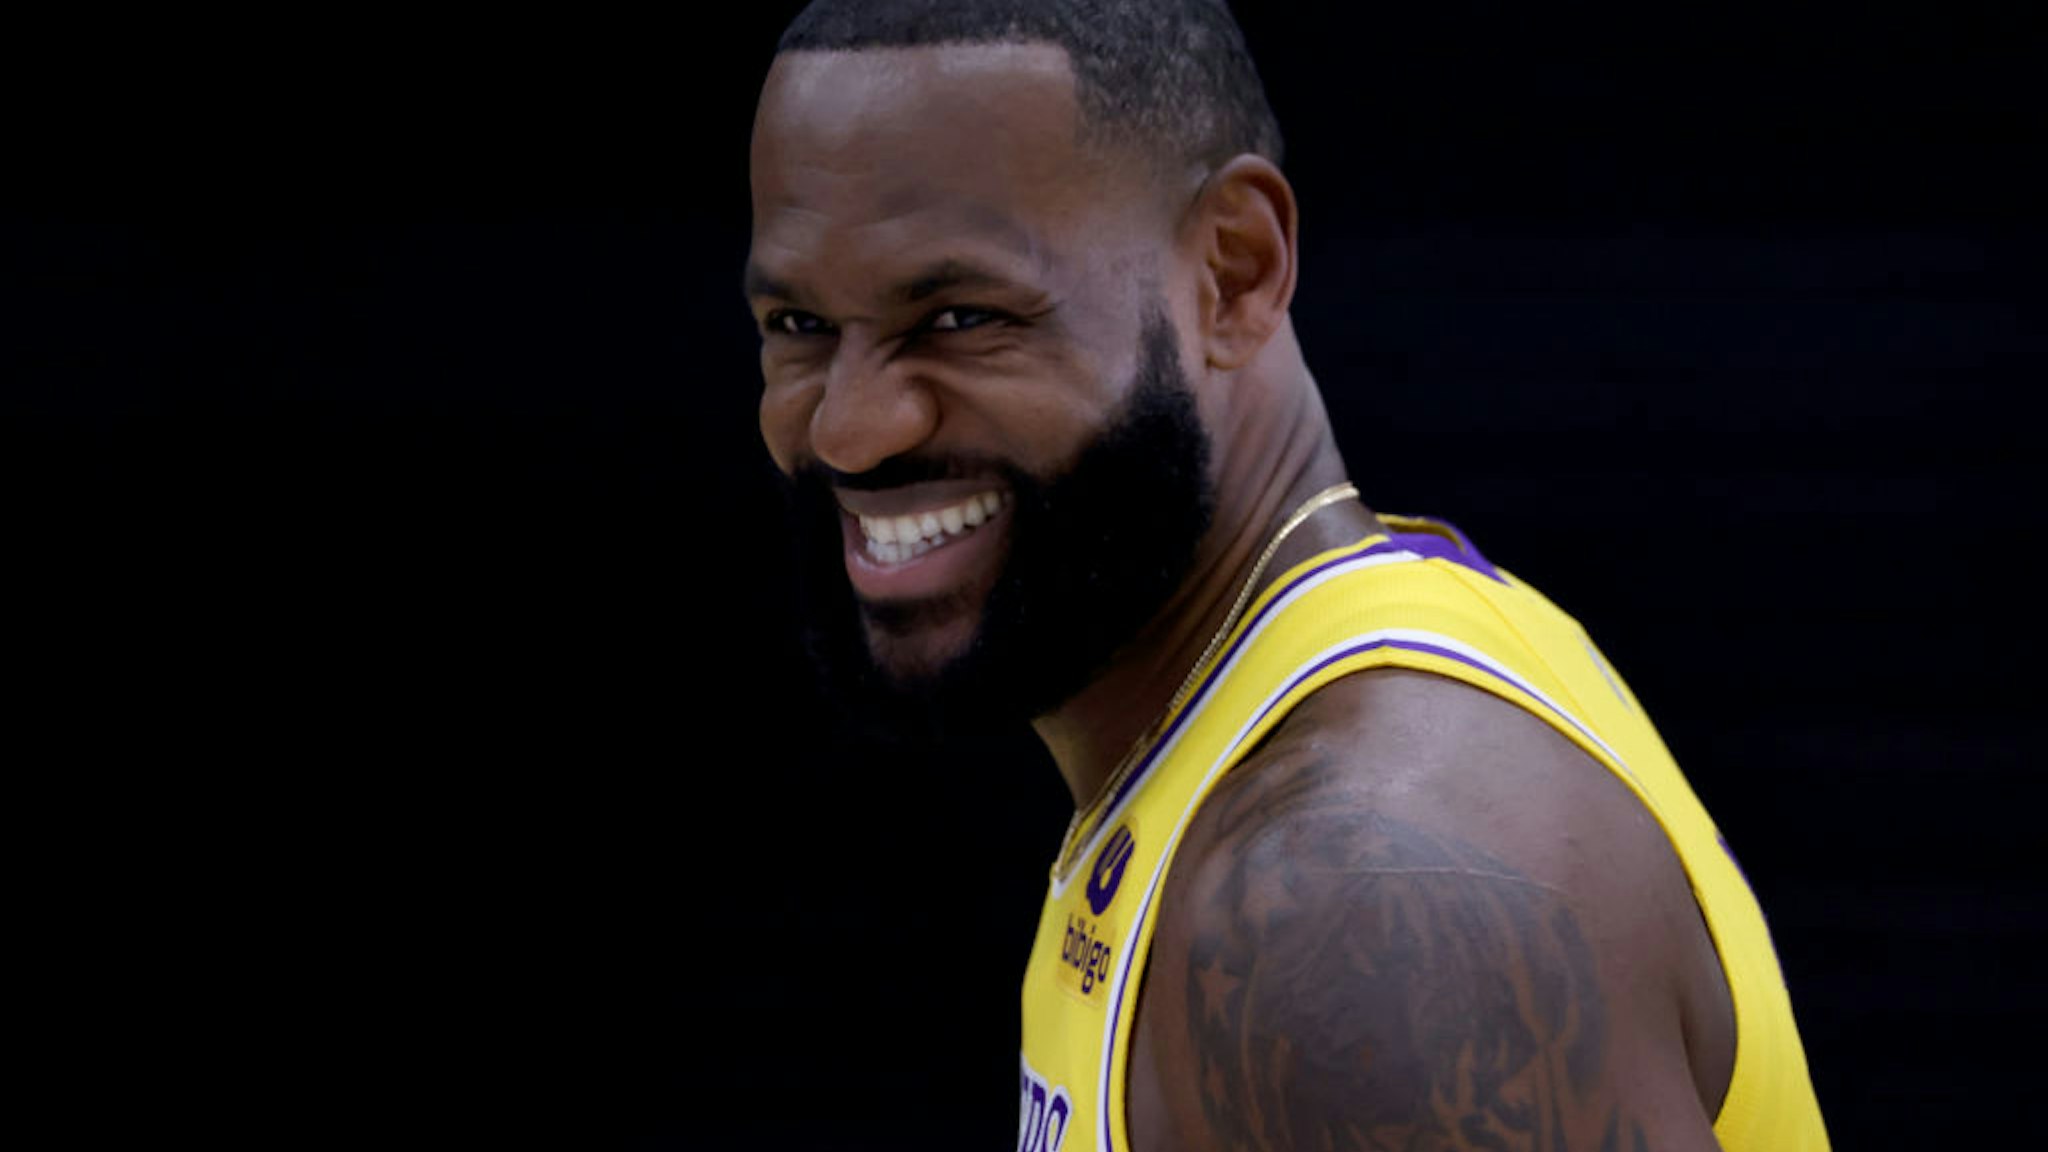 EL SEGUNDO, CALIFORNIA - SEPTEMBER 28: LeBron James #6 of the Los Angeles Lakers smiles during Los Angeles Lakers media day at UCLA Health Training Center on September 28, 2021 in El Segundo, California. (Photo by Harry How/Getty Images)